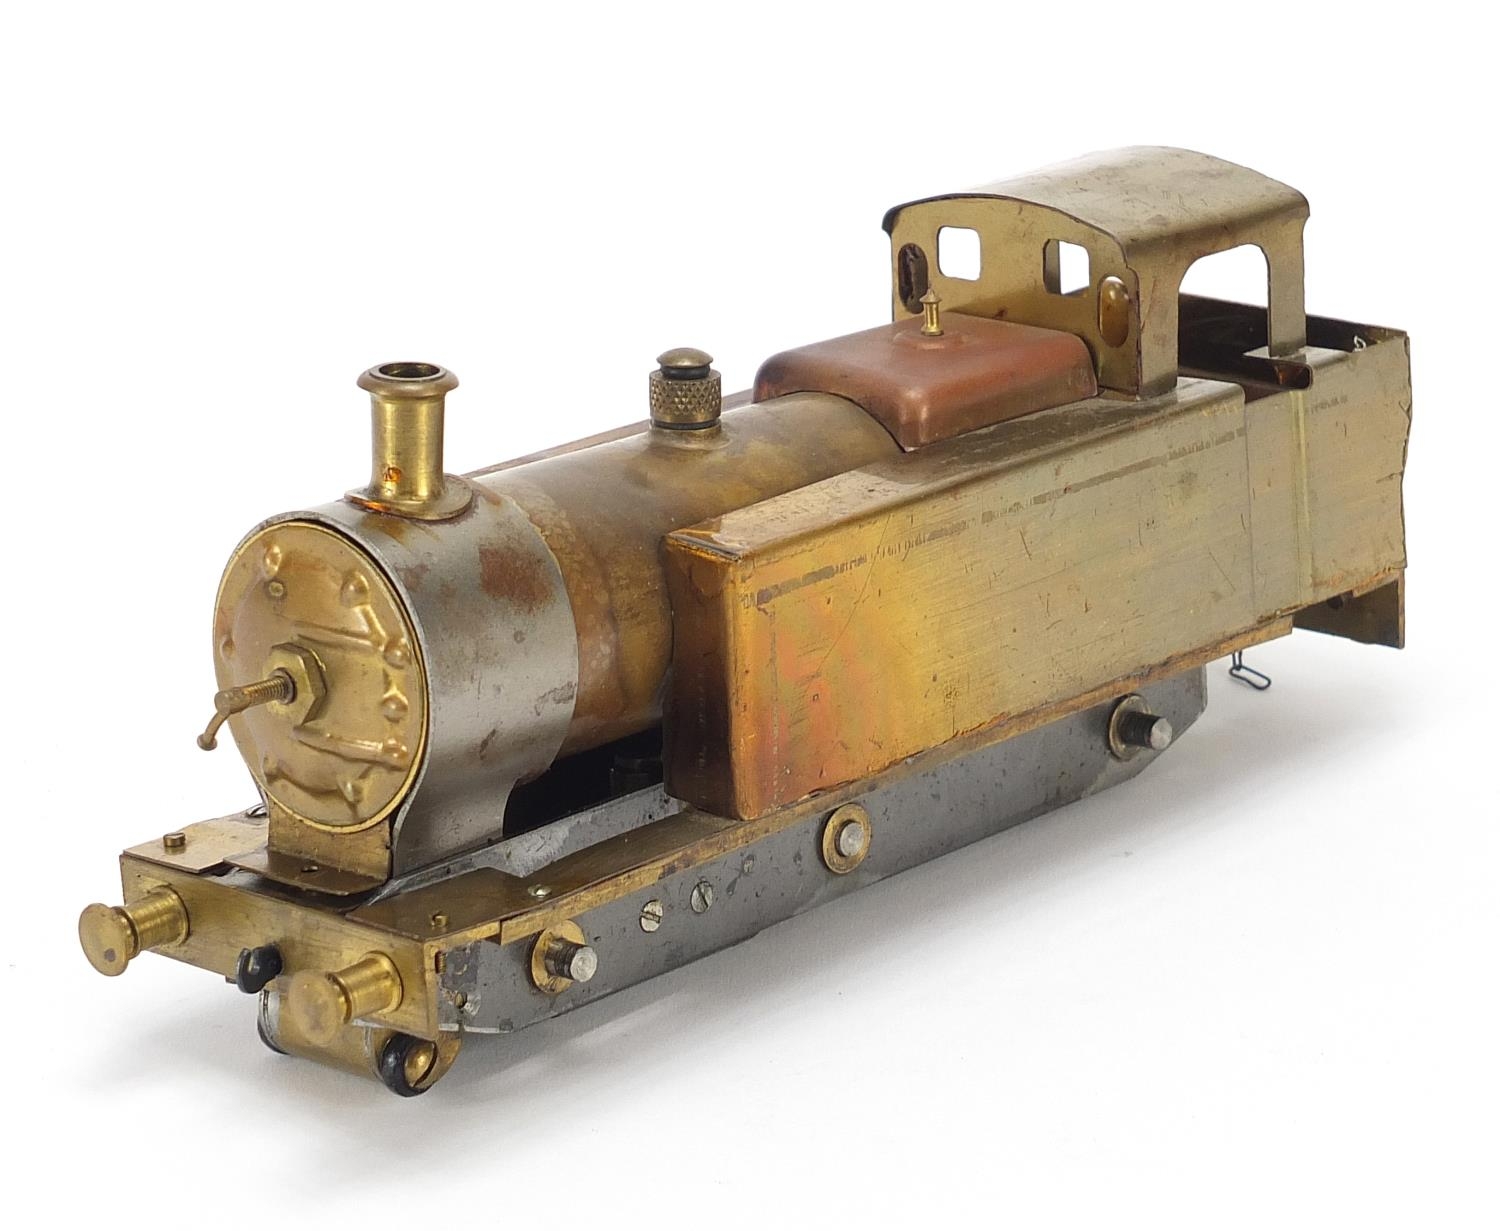 0 gauge Jinty kit live steam engine with accessories and box, 22cm in length - Image 4 of 7